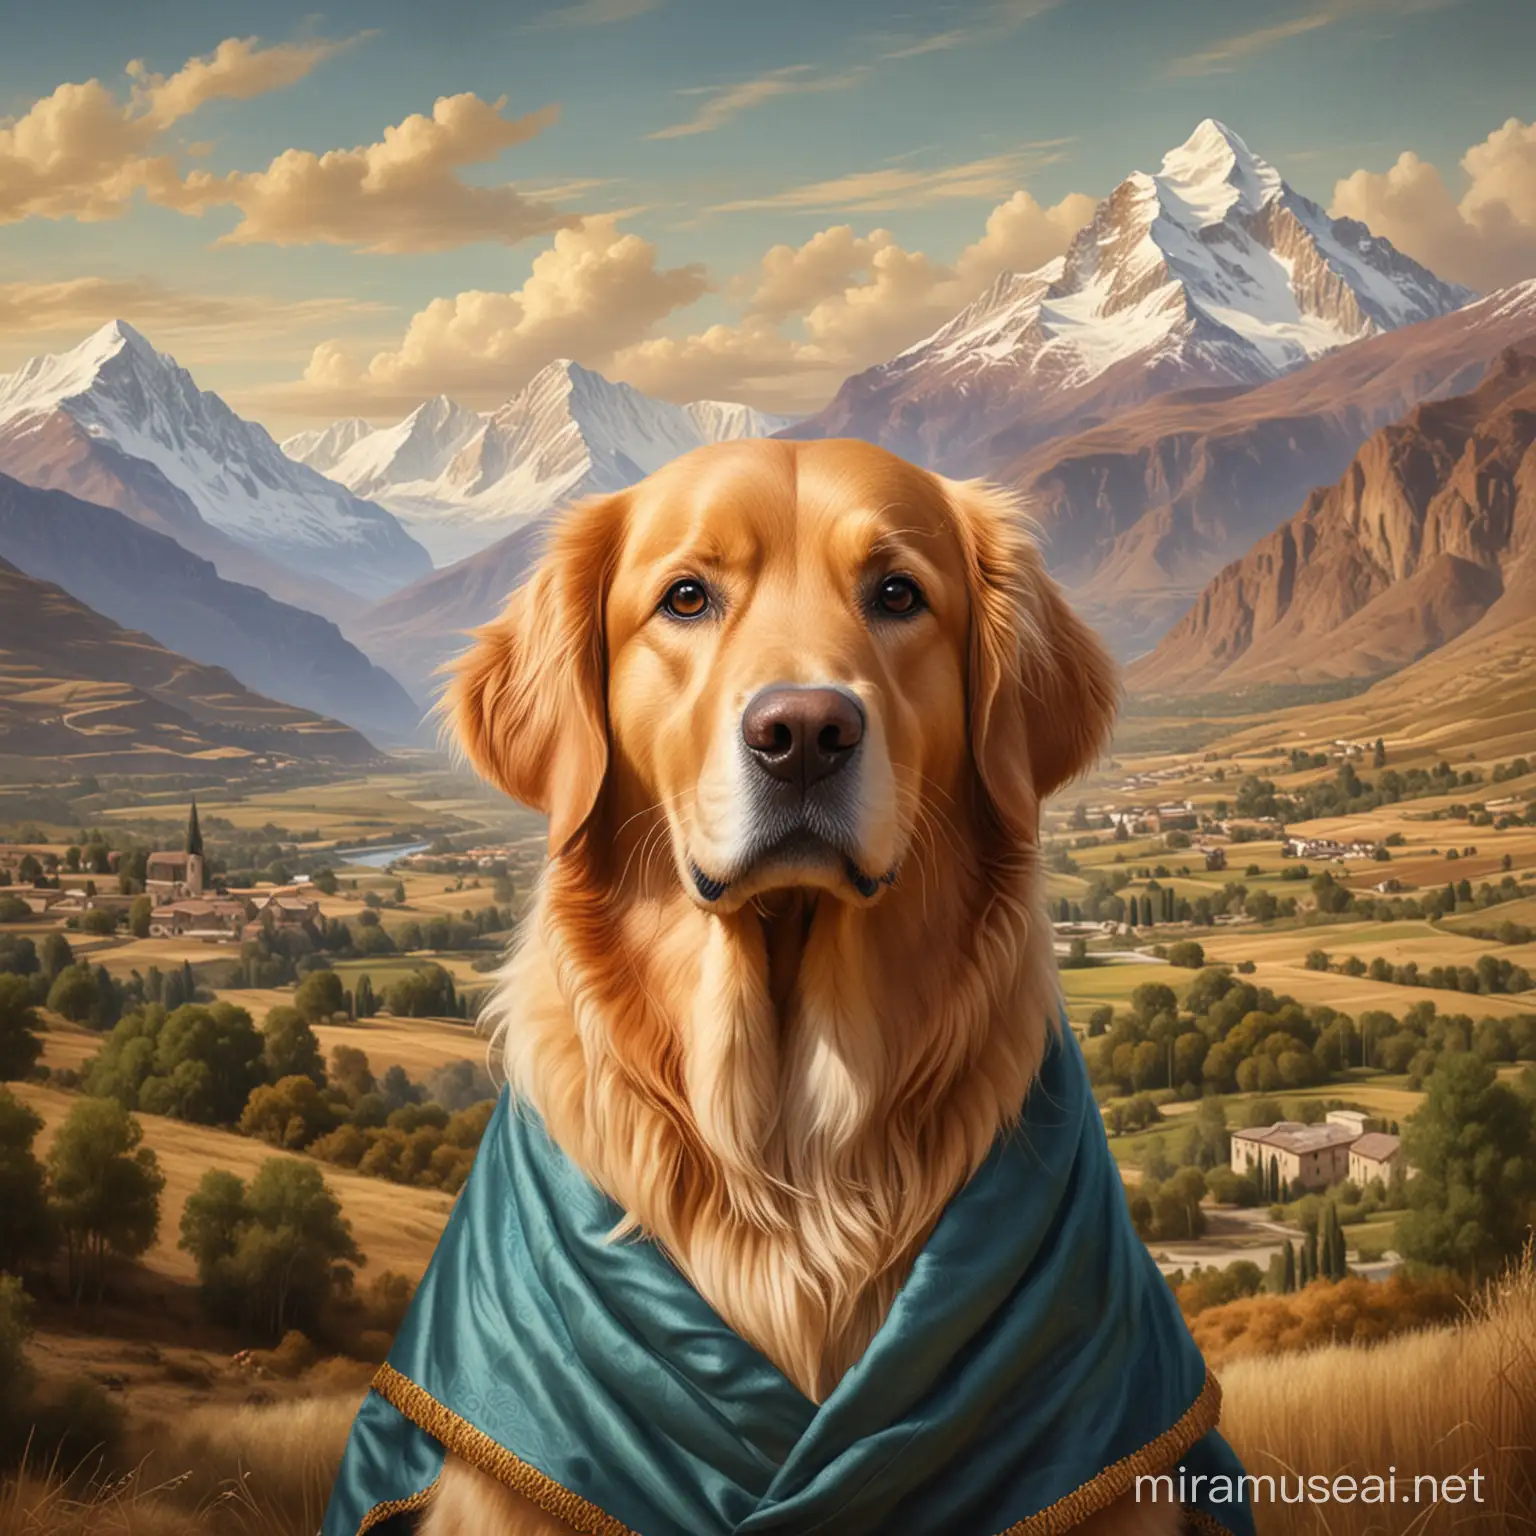 Golden Retriever Dog Portrait in La Gioconda Style with Andes Mountains Background